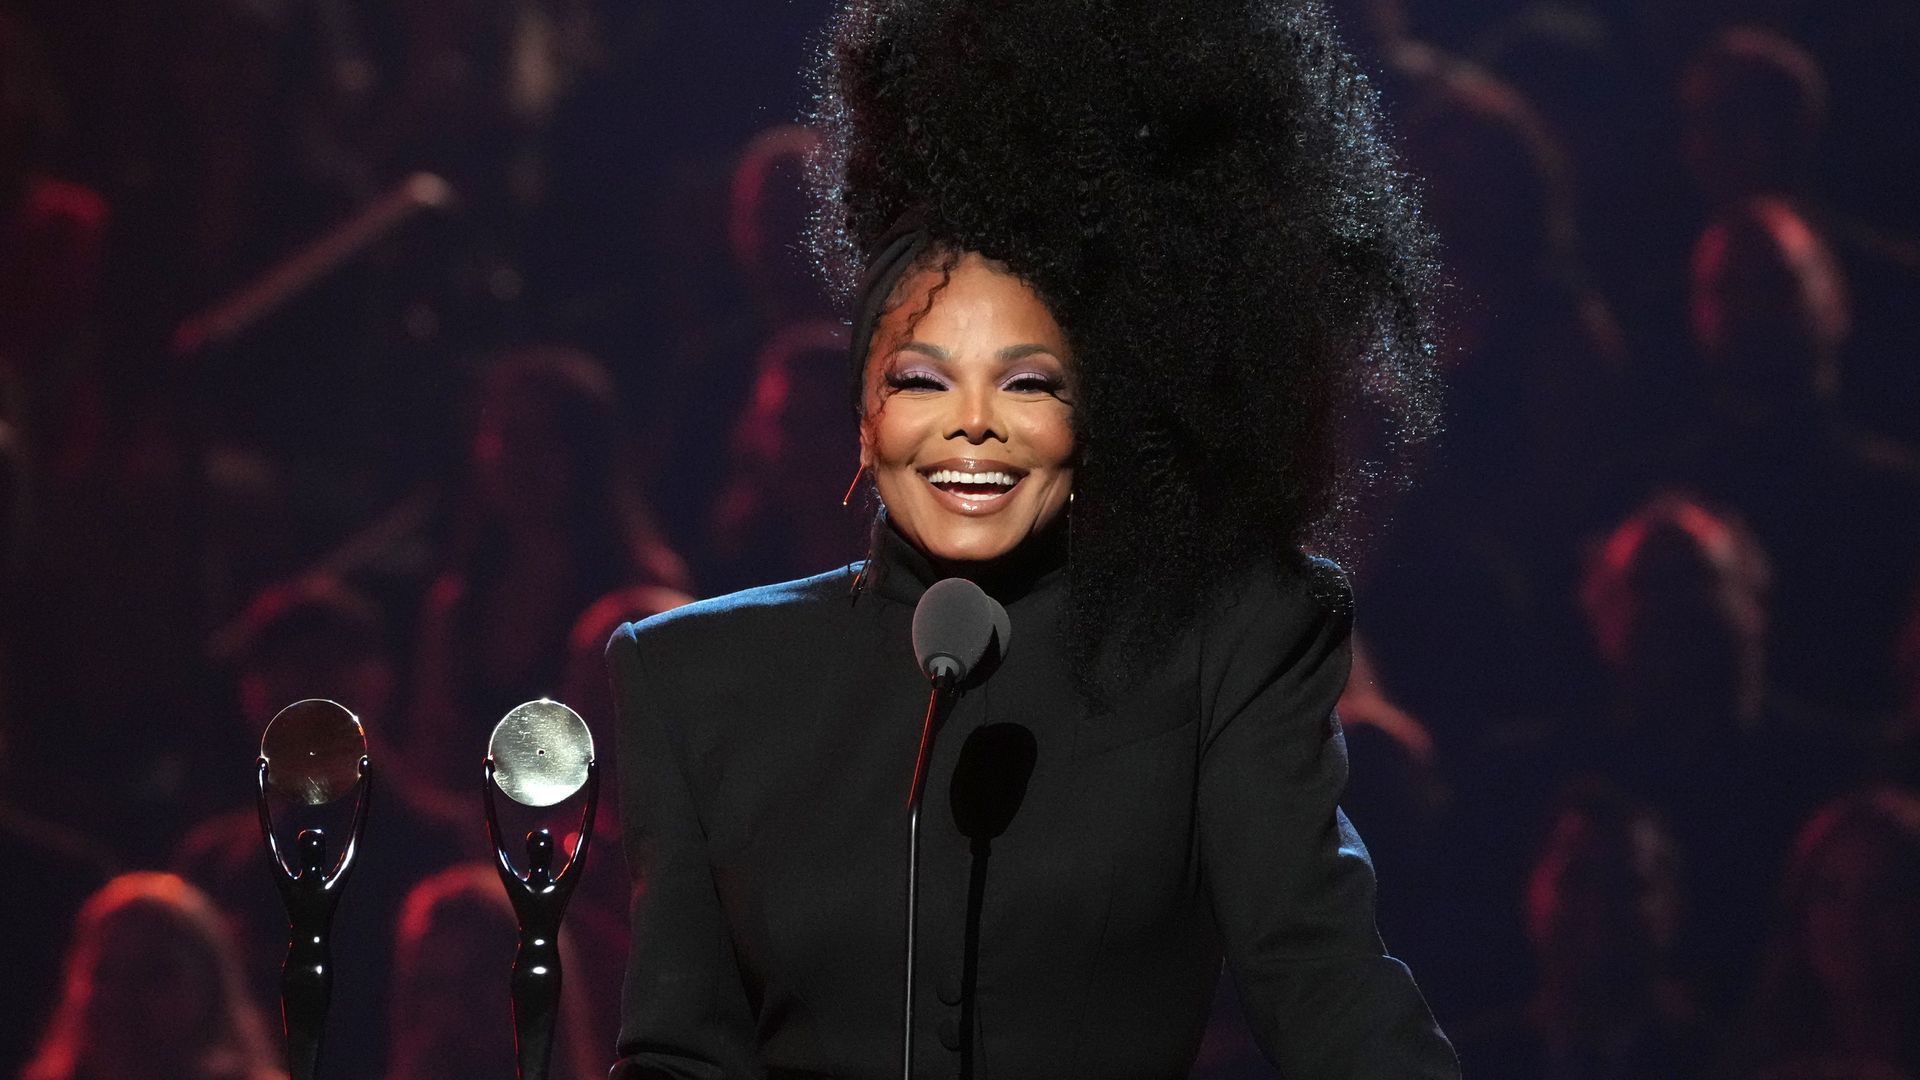 Janet Jackson's rarely-seen son attends her concerts as singer opens up about 'beautiful' motherhood